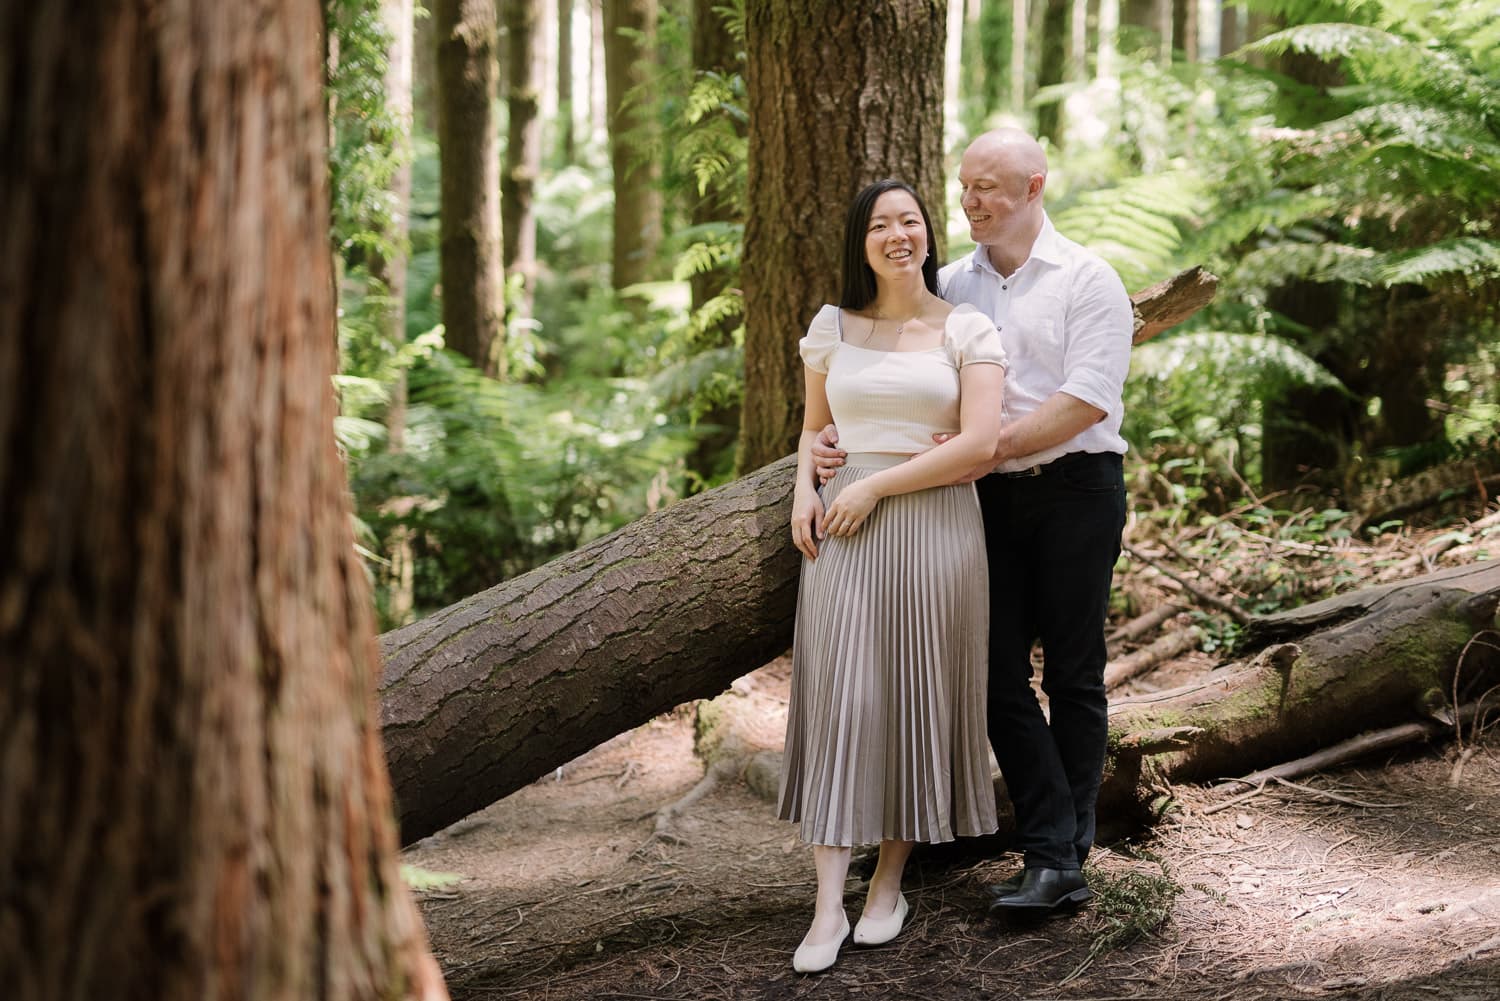 Happy couple in the forest